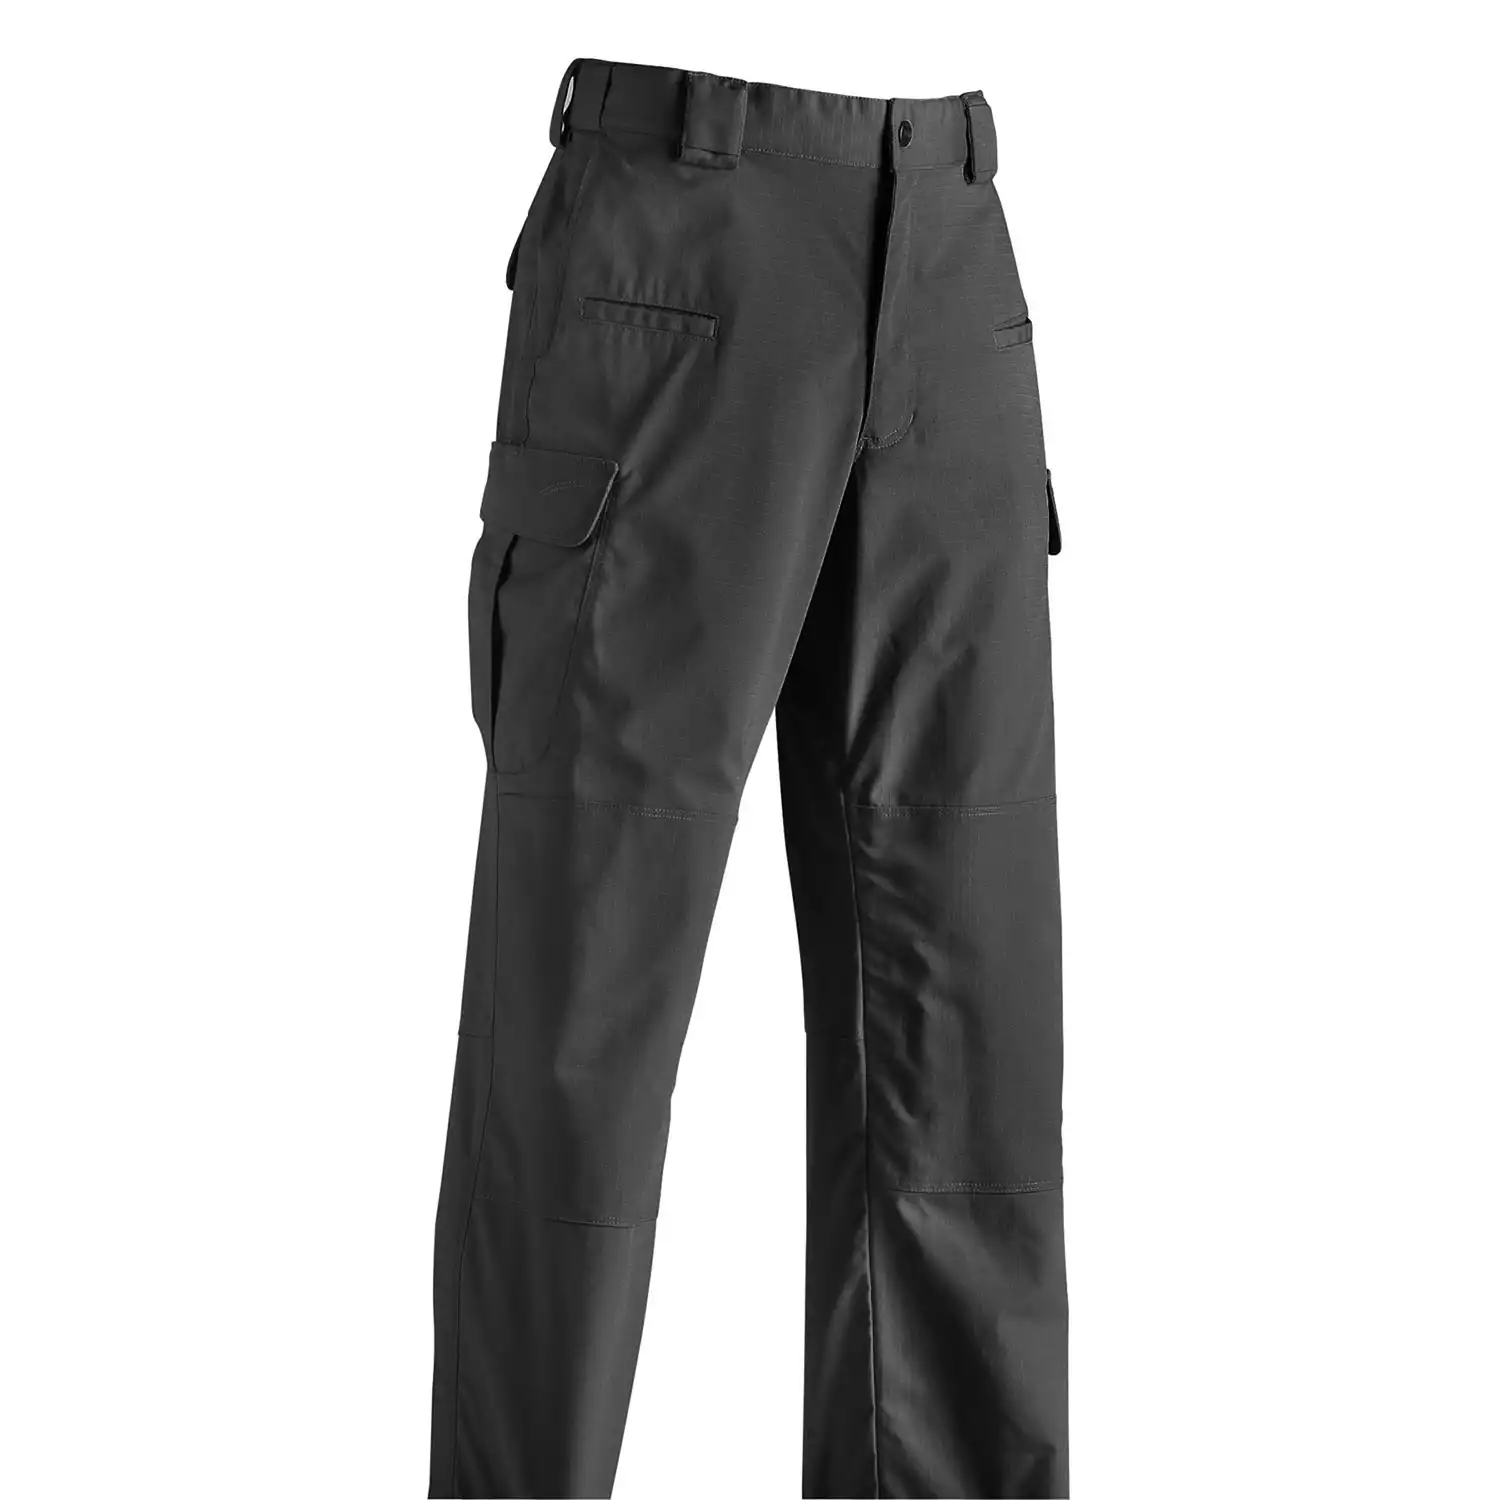 5.11 Tactical Stryke Pants by Ripstop